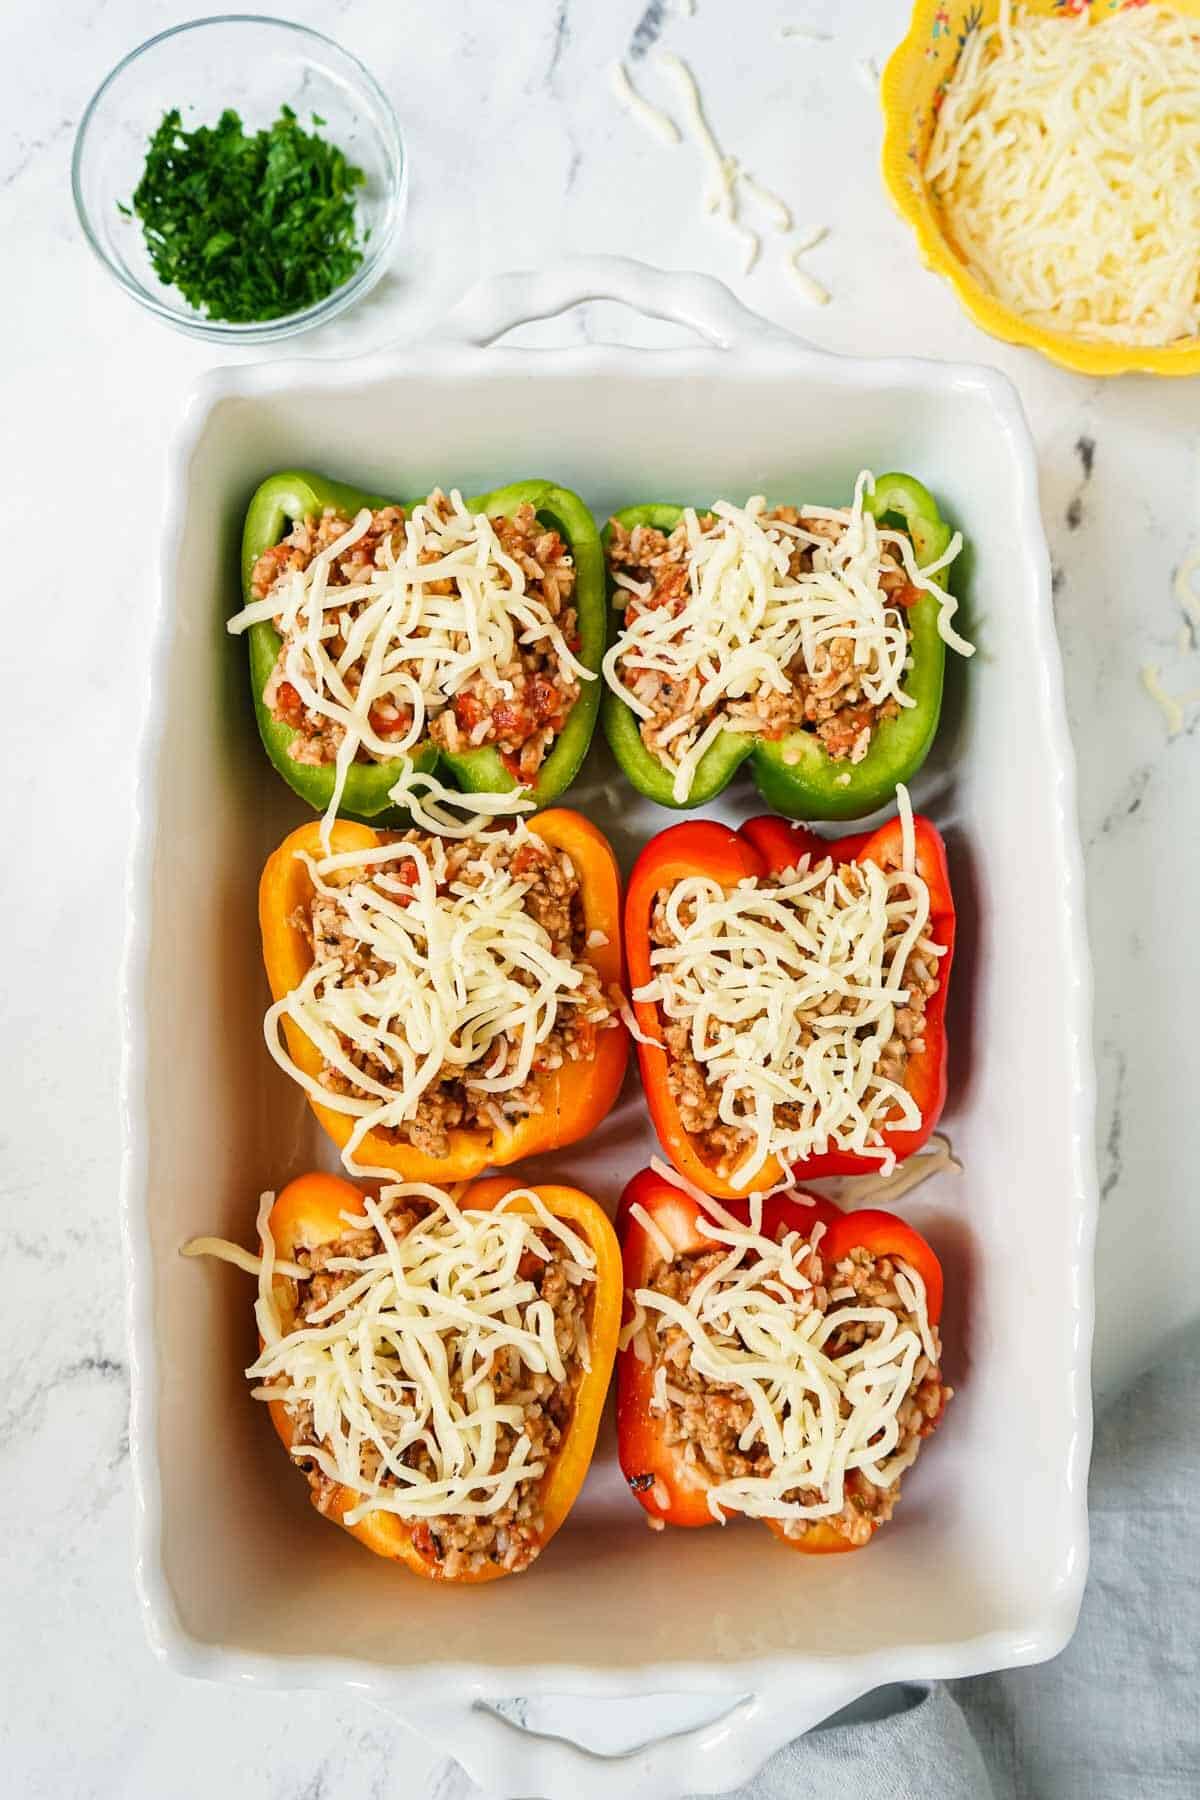 Bell peppers that are filled with stuffing and topped with cheese in a white casserole dish before being cooked.